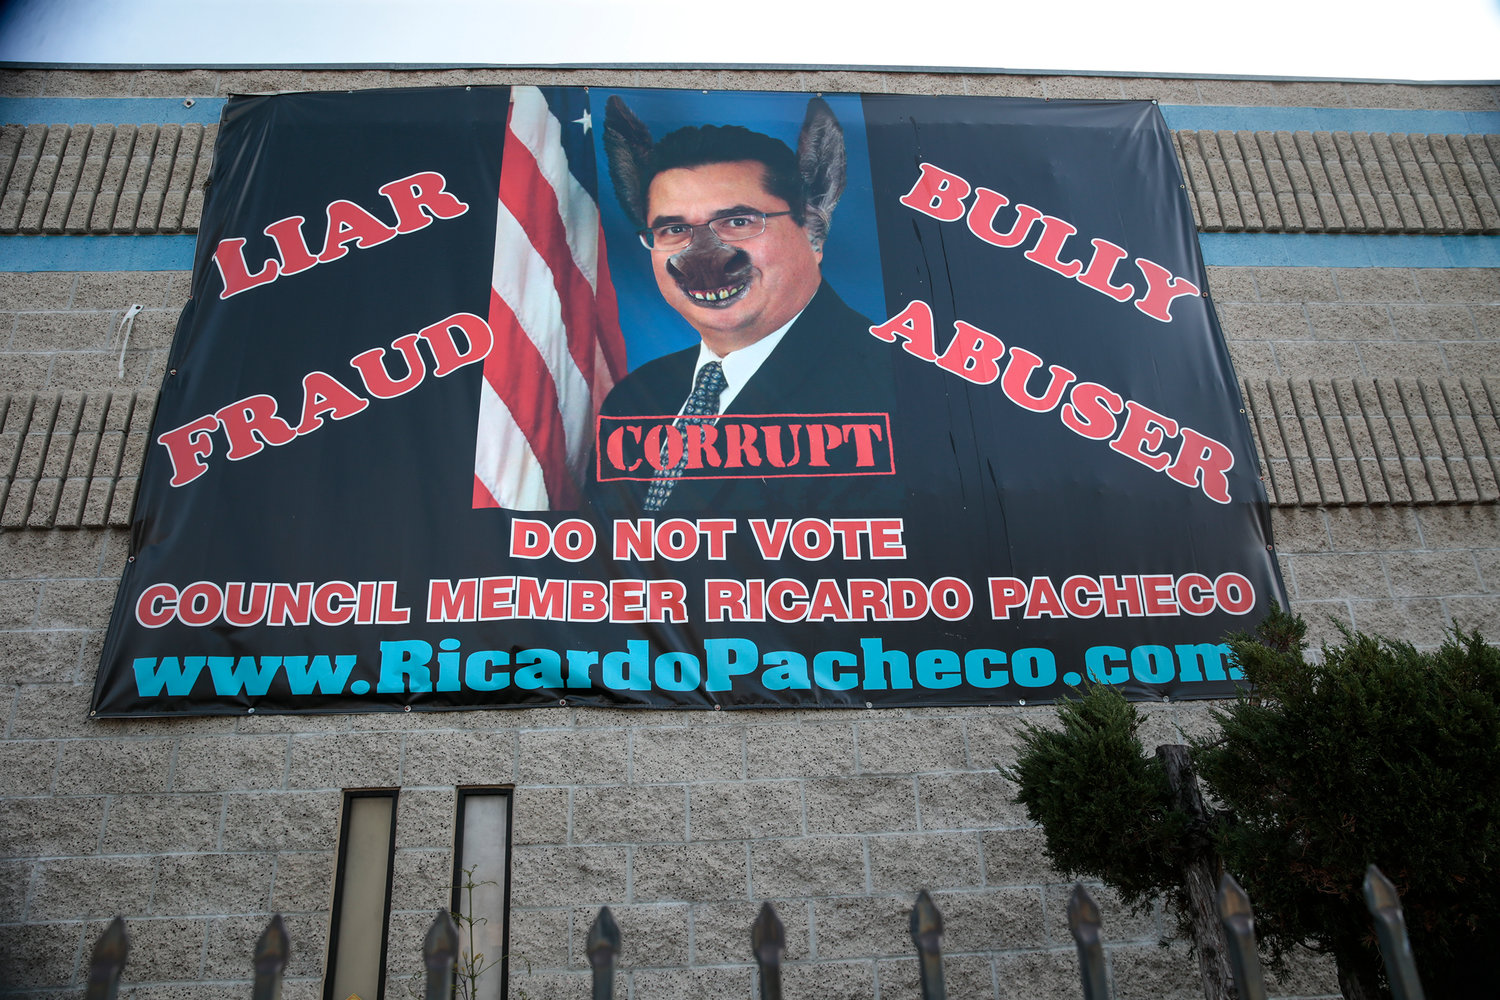 Former Baldwin Park Council Member Ricardo Pacheco was labeled "corrupt" in a sign hung outside a business, Jan. 16, 2020 in Baldwin Park, California. (Robert Gauthier/Los Angeles Times/TNS)